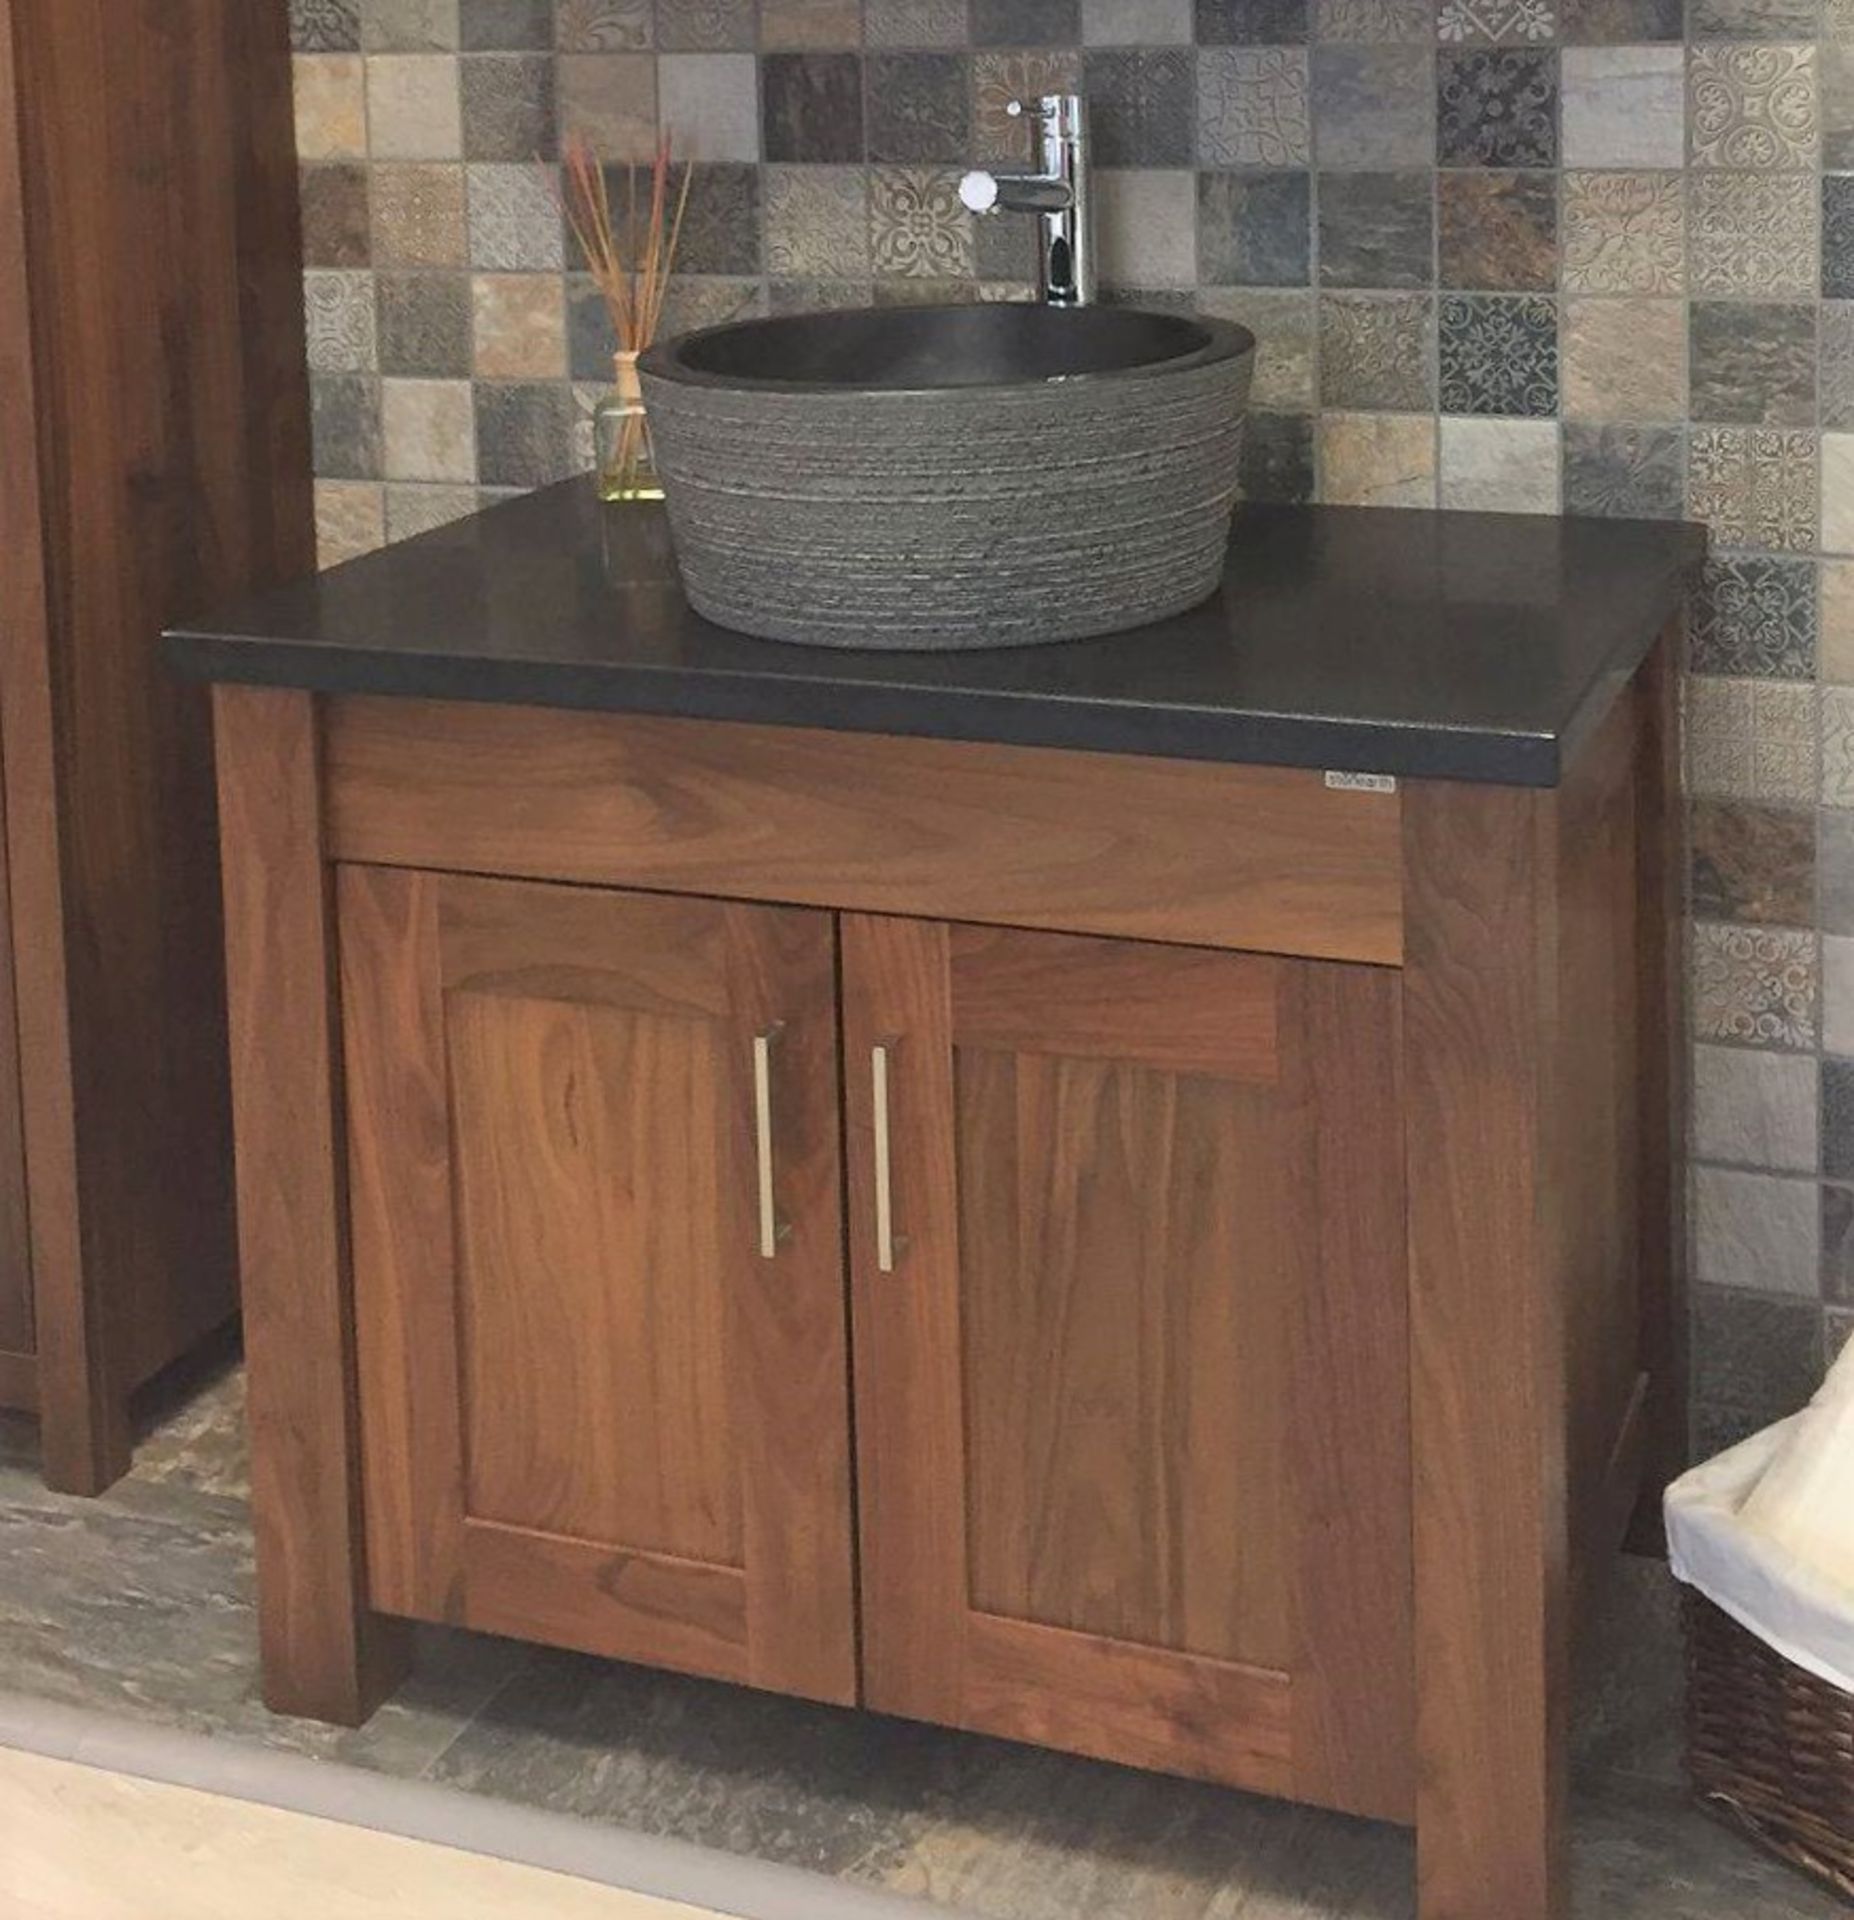 1 x Stonearth 'Finesse' Countertop Washstand - American Solid Walnut - Original RRP £1,400 - Image 6 of 10